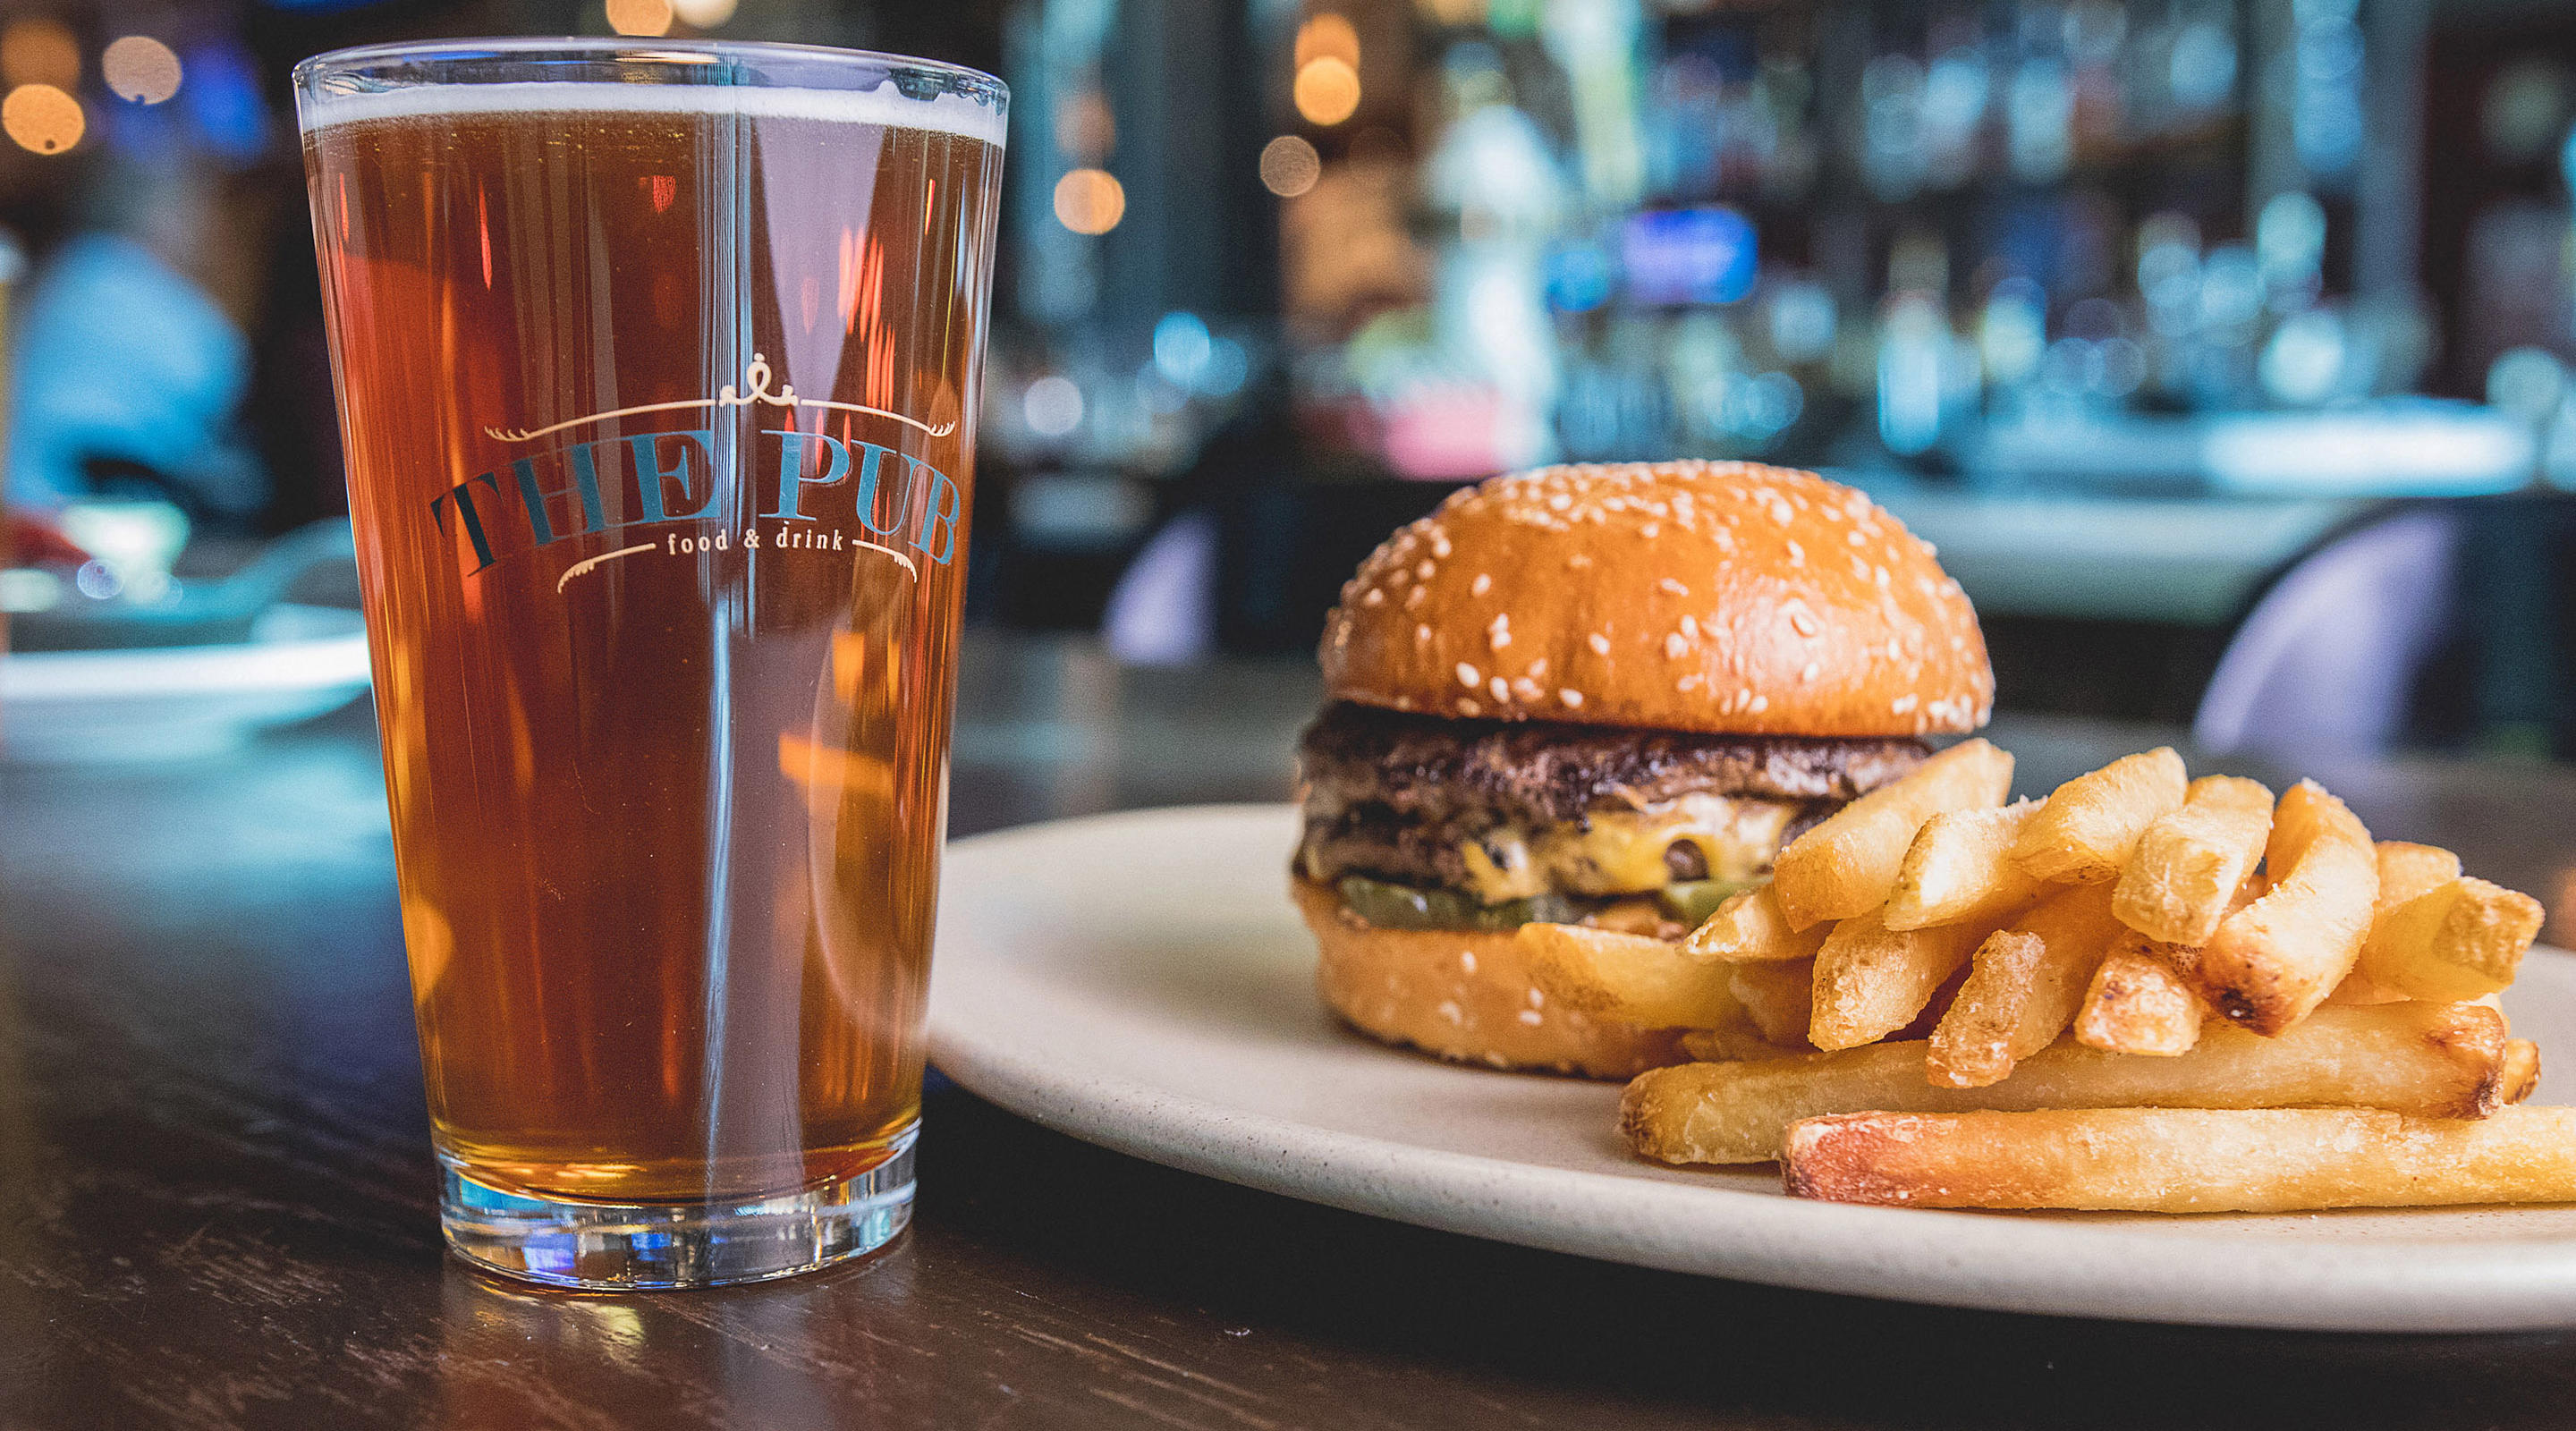 A burger and beer, the perfect combination.